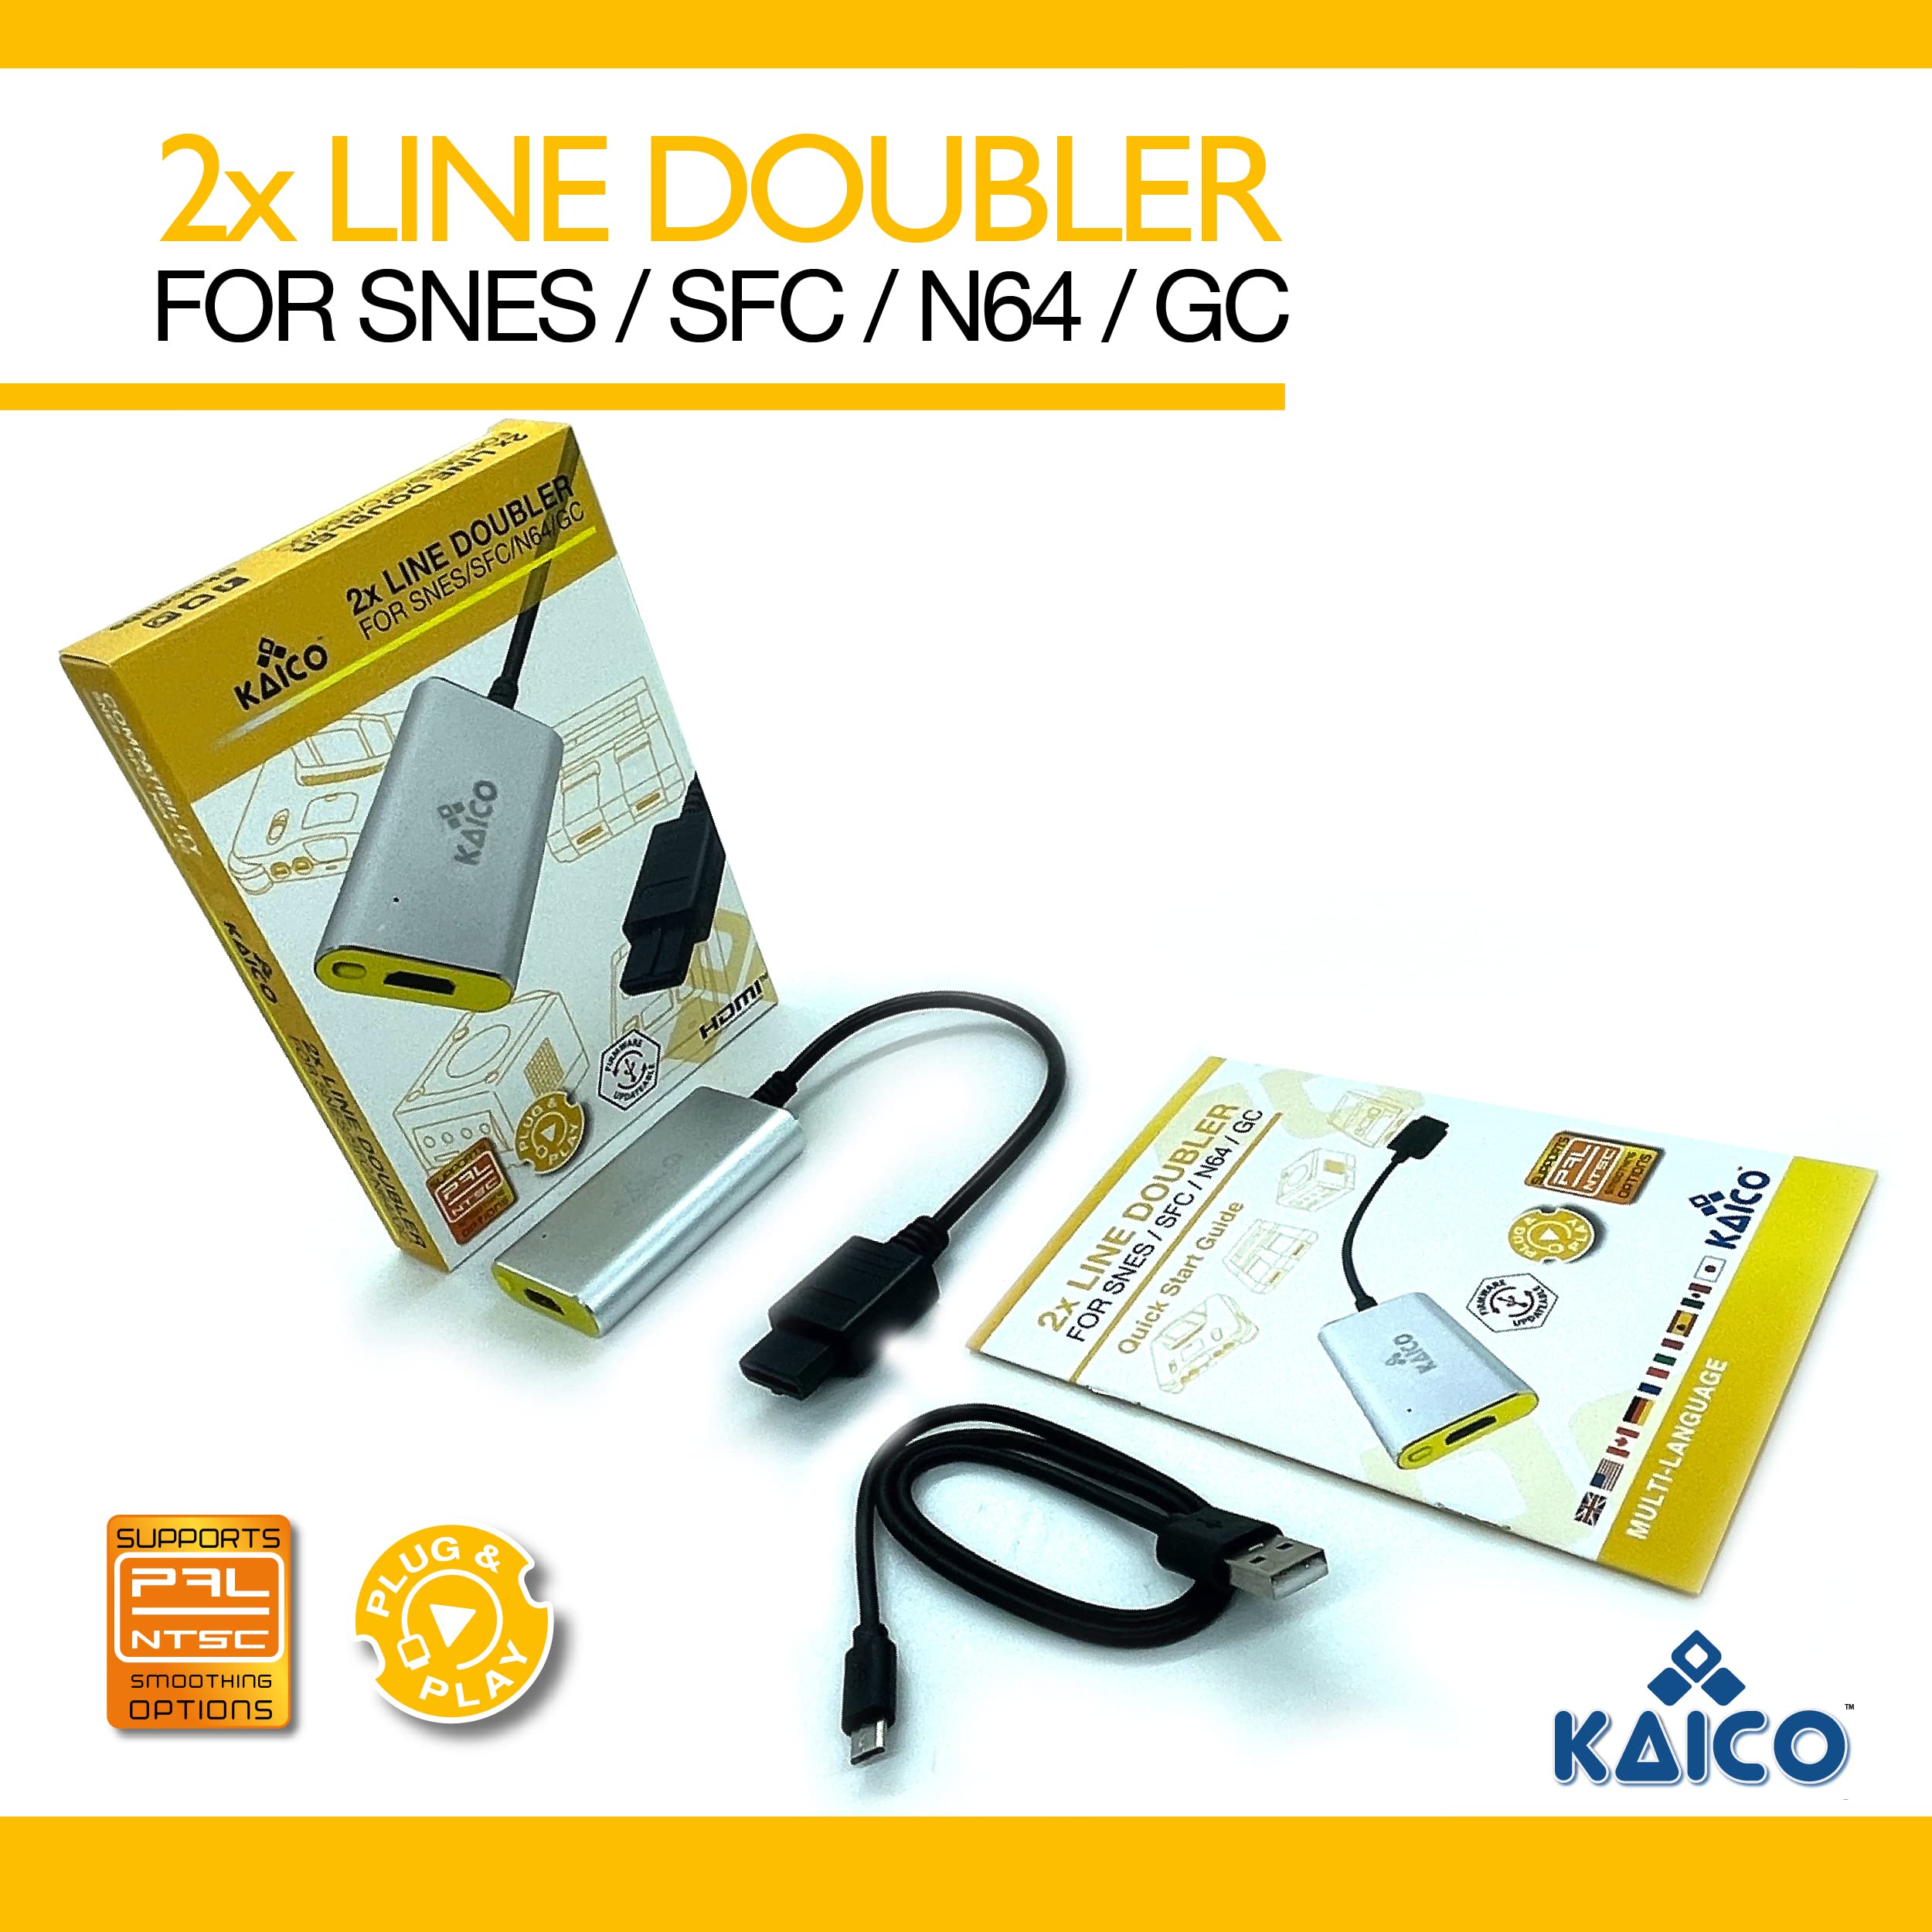 Kaico Analogue x2 HDMI Adapter for use with Nintendo N64 Super Nintendo, Super Famicom and Gamecube - Supports 2X Line-Doubling - A Simple Plug & Play by Kaico for Nintendo 64 GC and SNES Adaptor